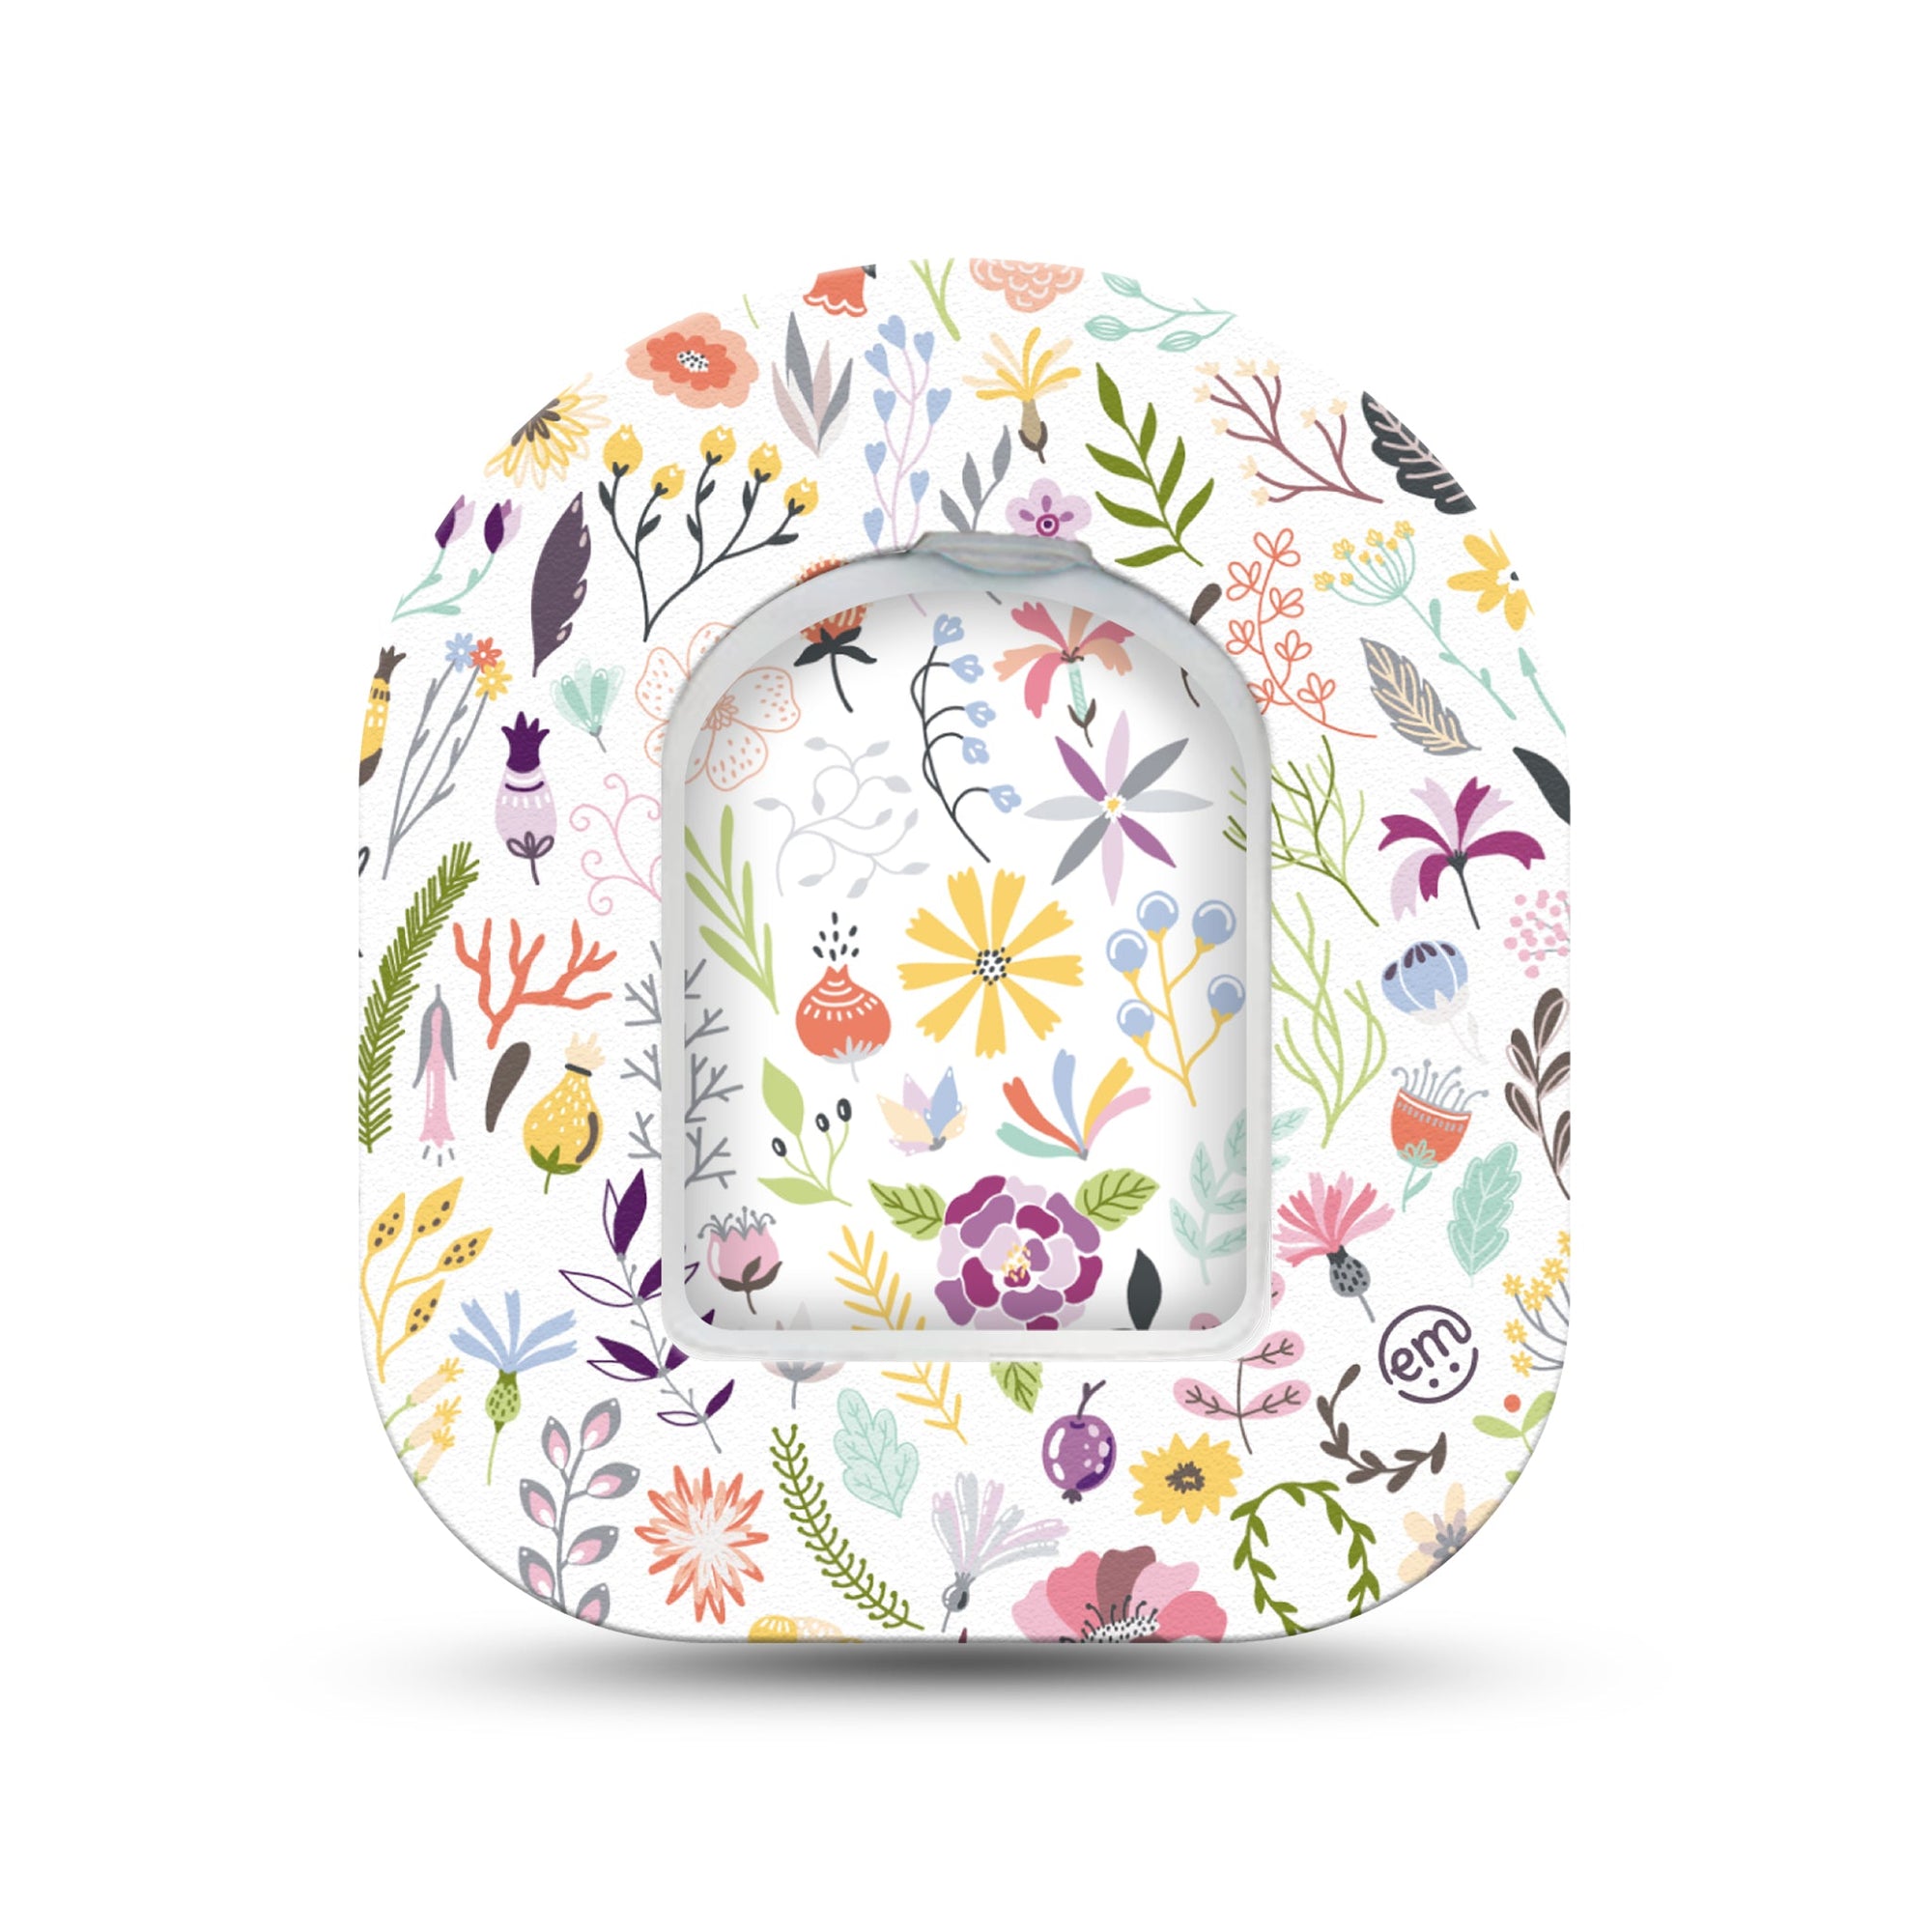 ExpressionMed Springy Stems Pod Mini Tape Single Sticker and Single Tape, Botanical Spring Patch Pump Design